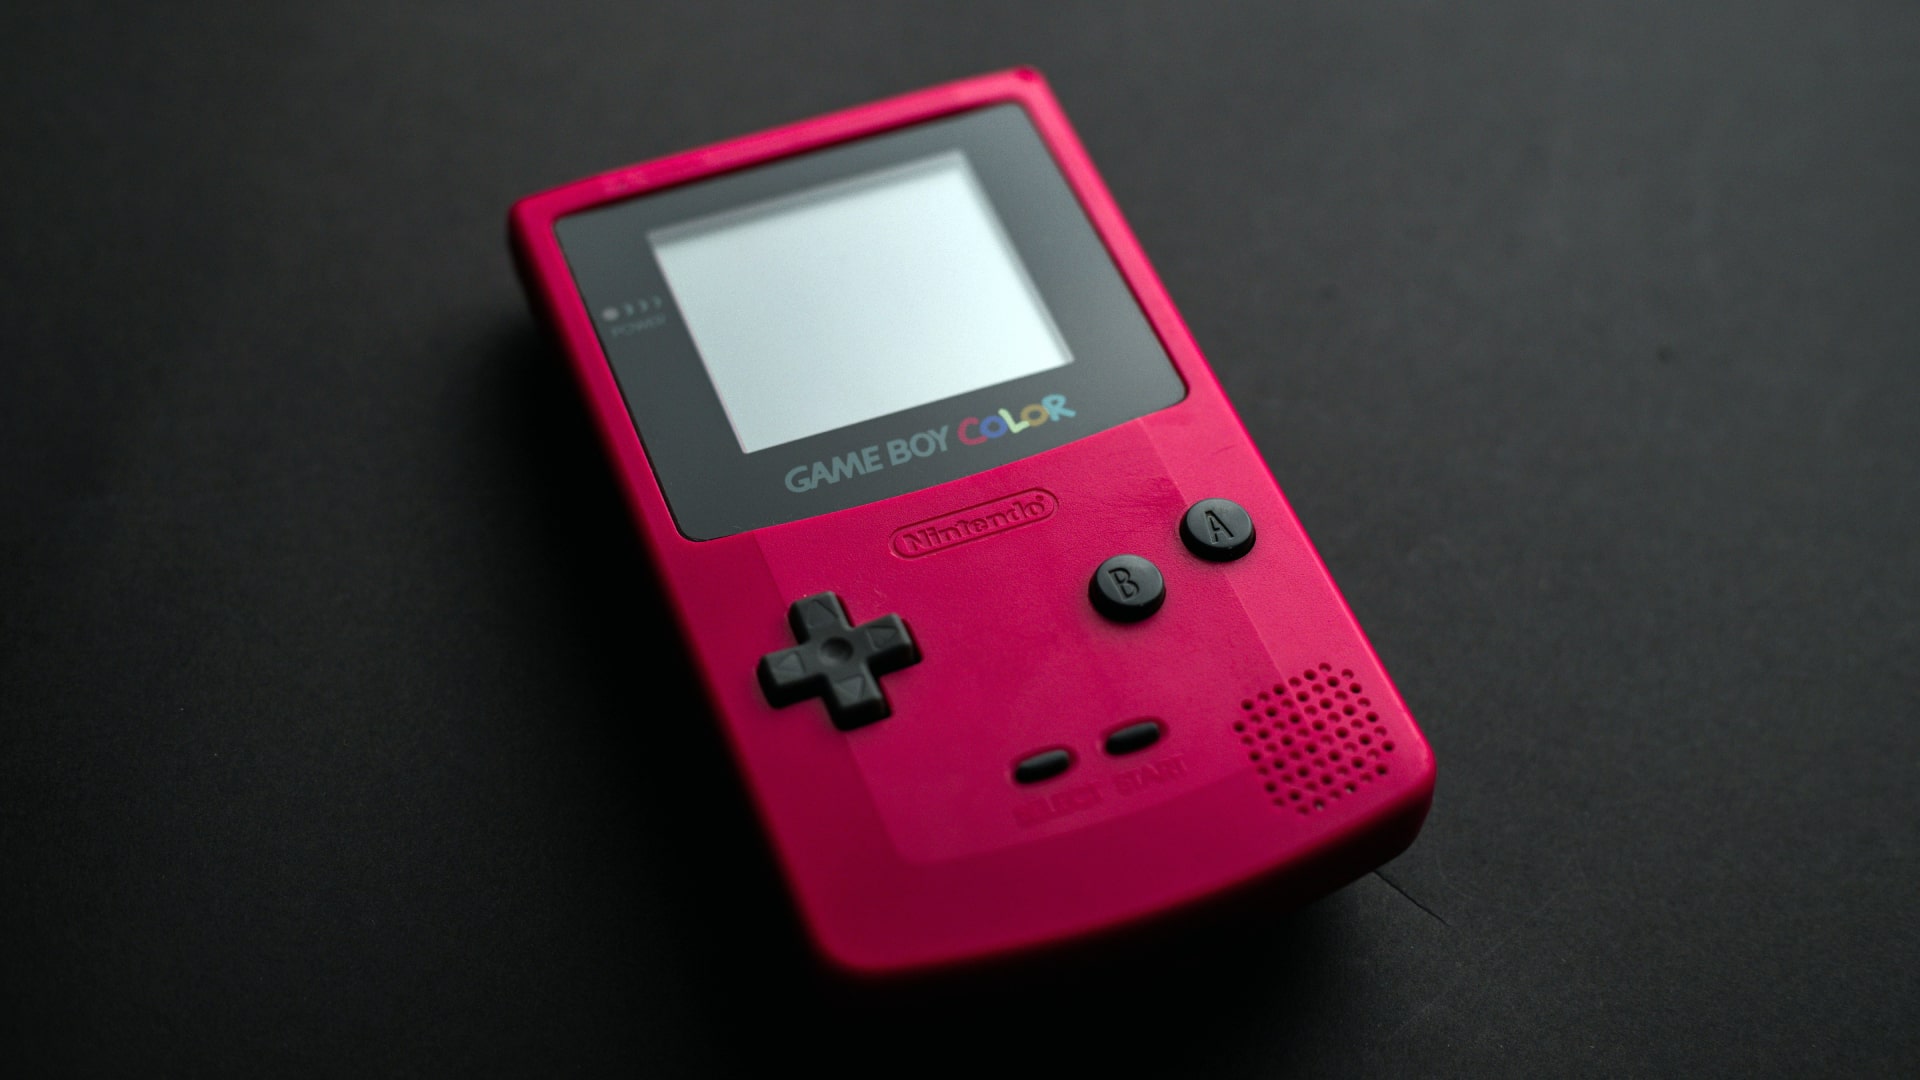 A red Nintendo Game Boy Color lying on a surface.